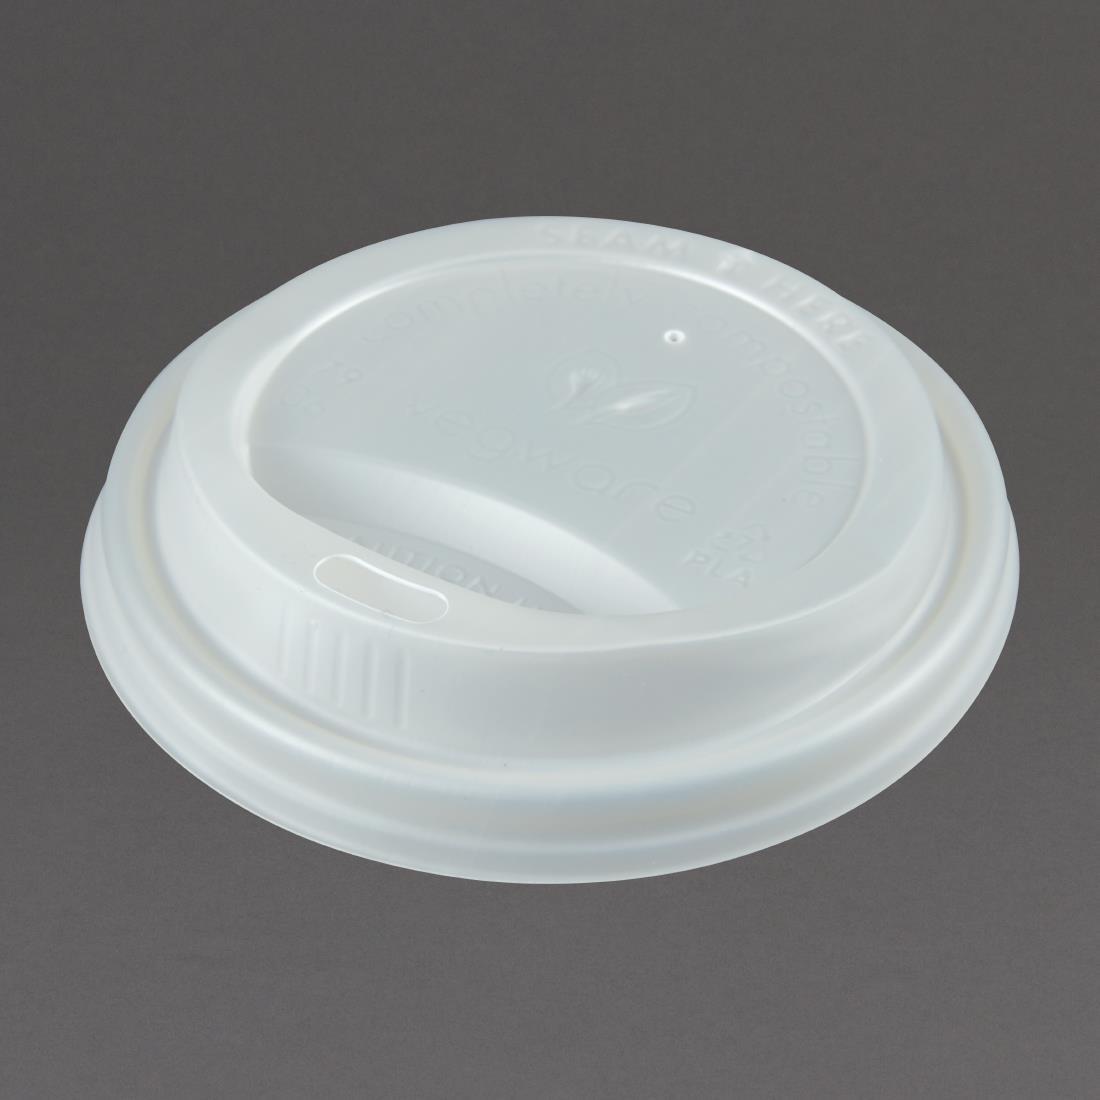 Vegware Compostable Coffee Cup Lids 225ml / 8oz (Pack of 1000) - GH024  - 2